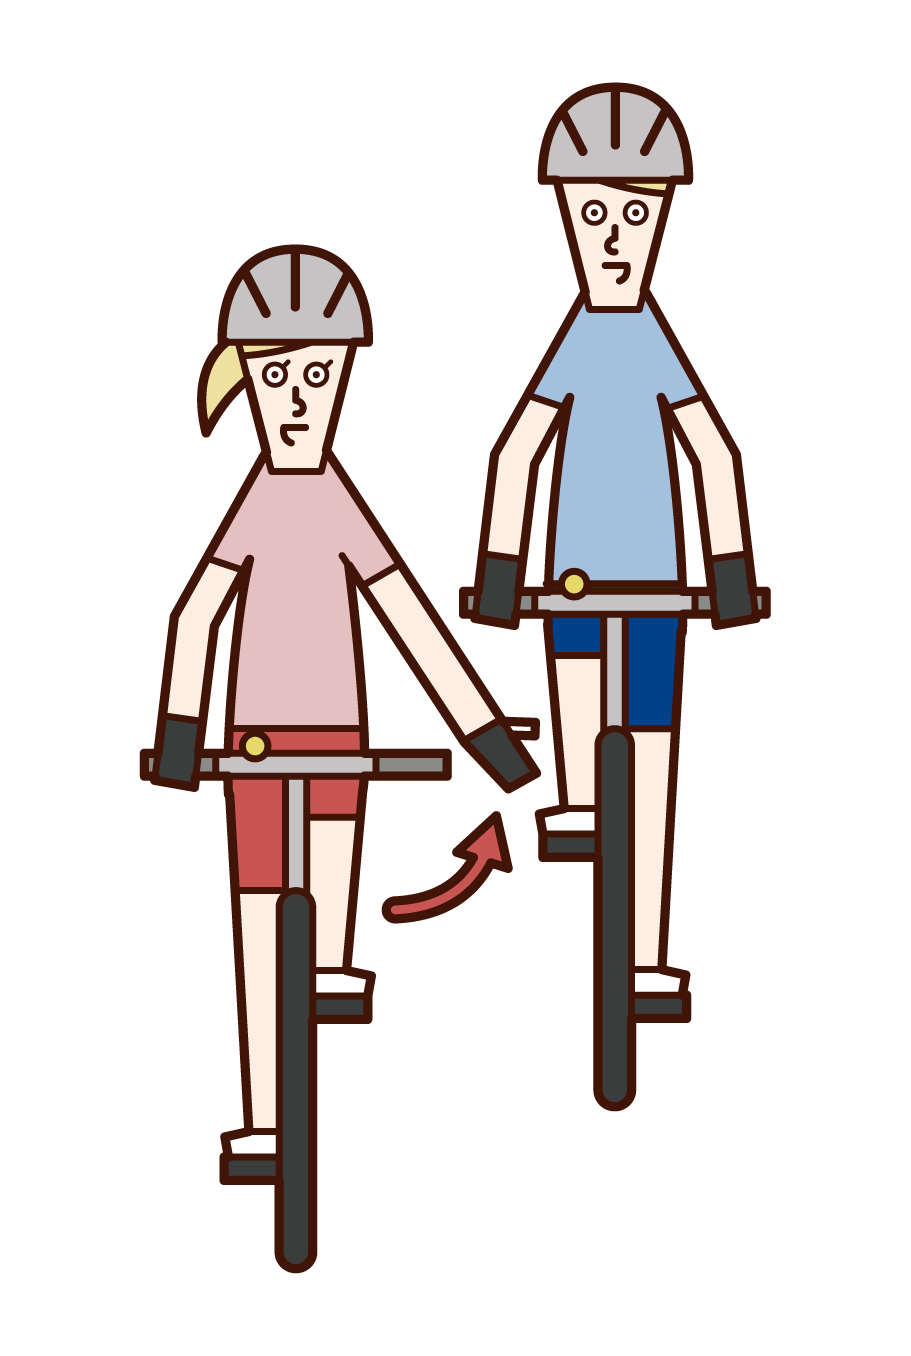 Illustration of a bicycle hand signal and a woman who has you go ahead